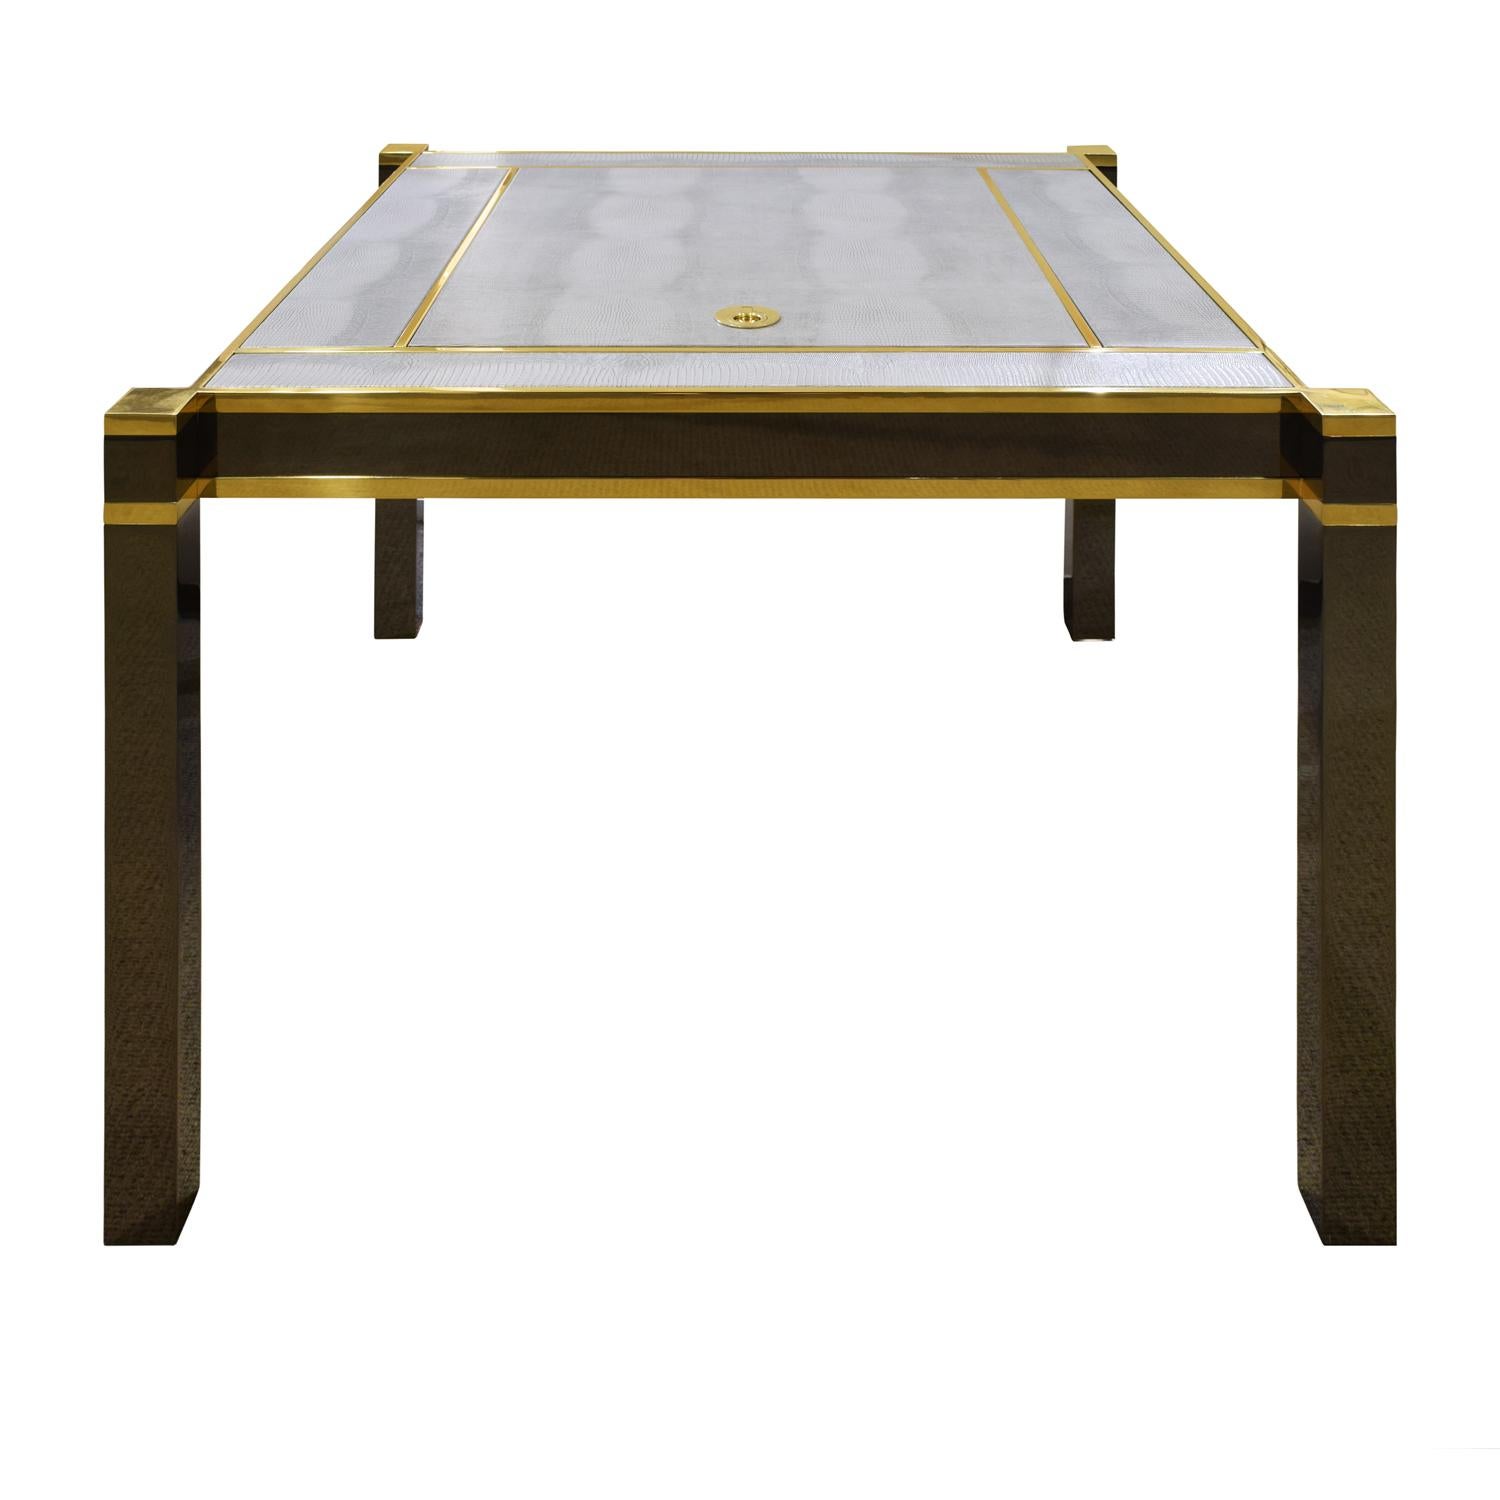 Exceptional “Square Leg Game Table” in polished gunmetal and brass with light gray embossed lizard leather inset top panels with backgammon board under removable cover by Karl Springer, American, 1970’s. This piece, combining meticulous metal